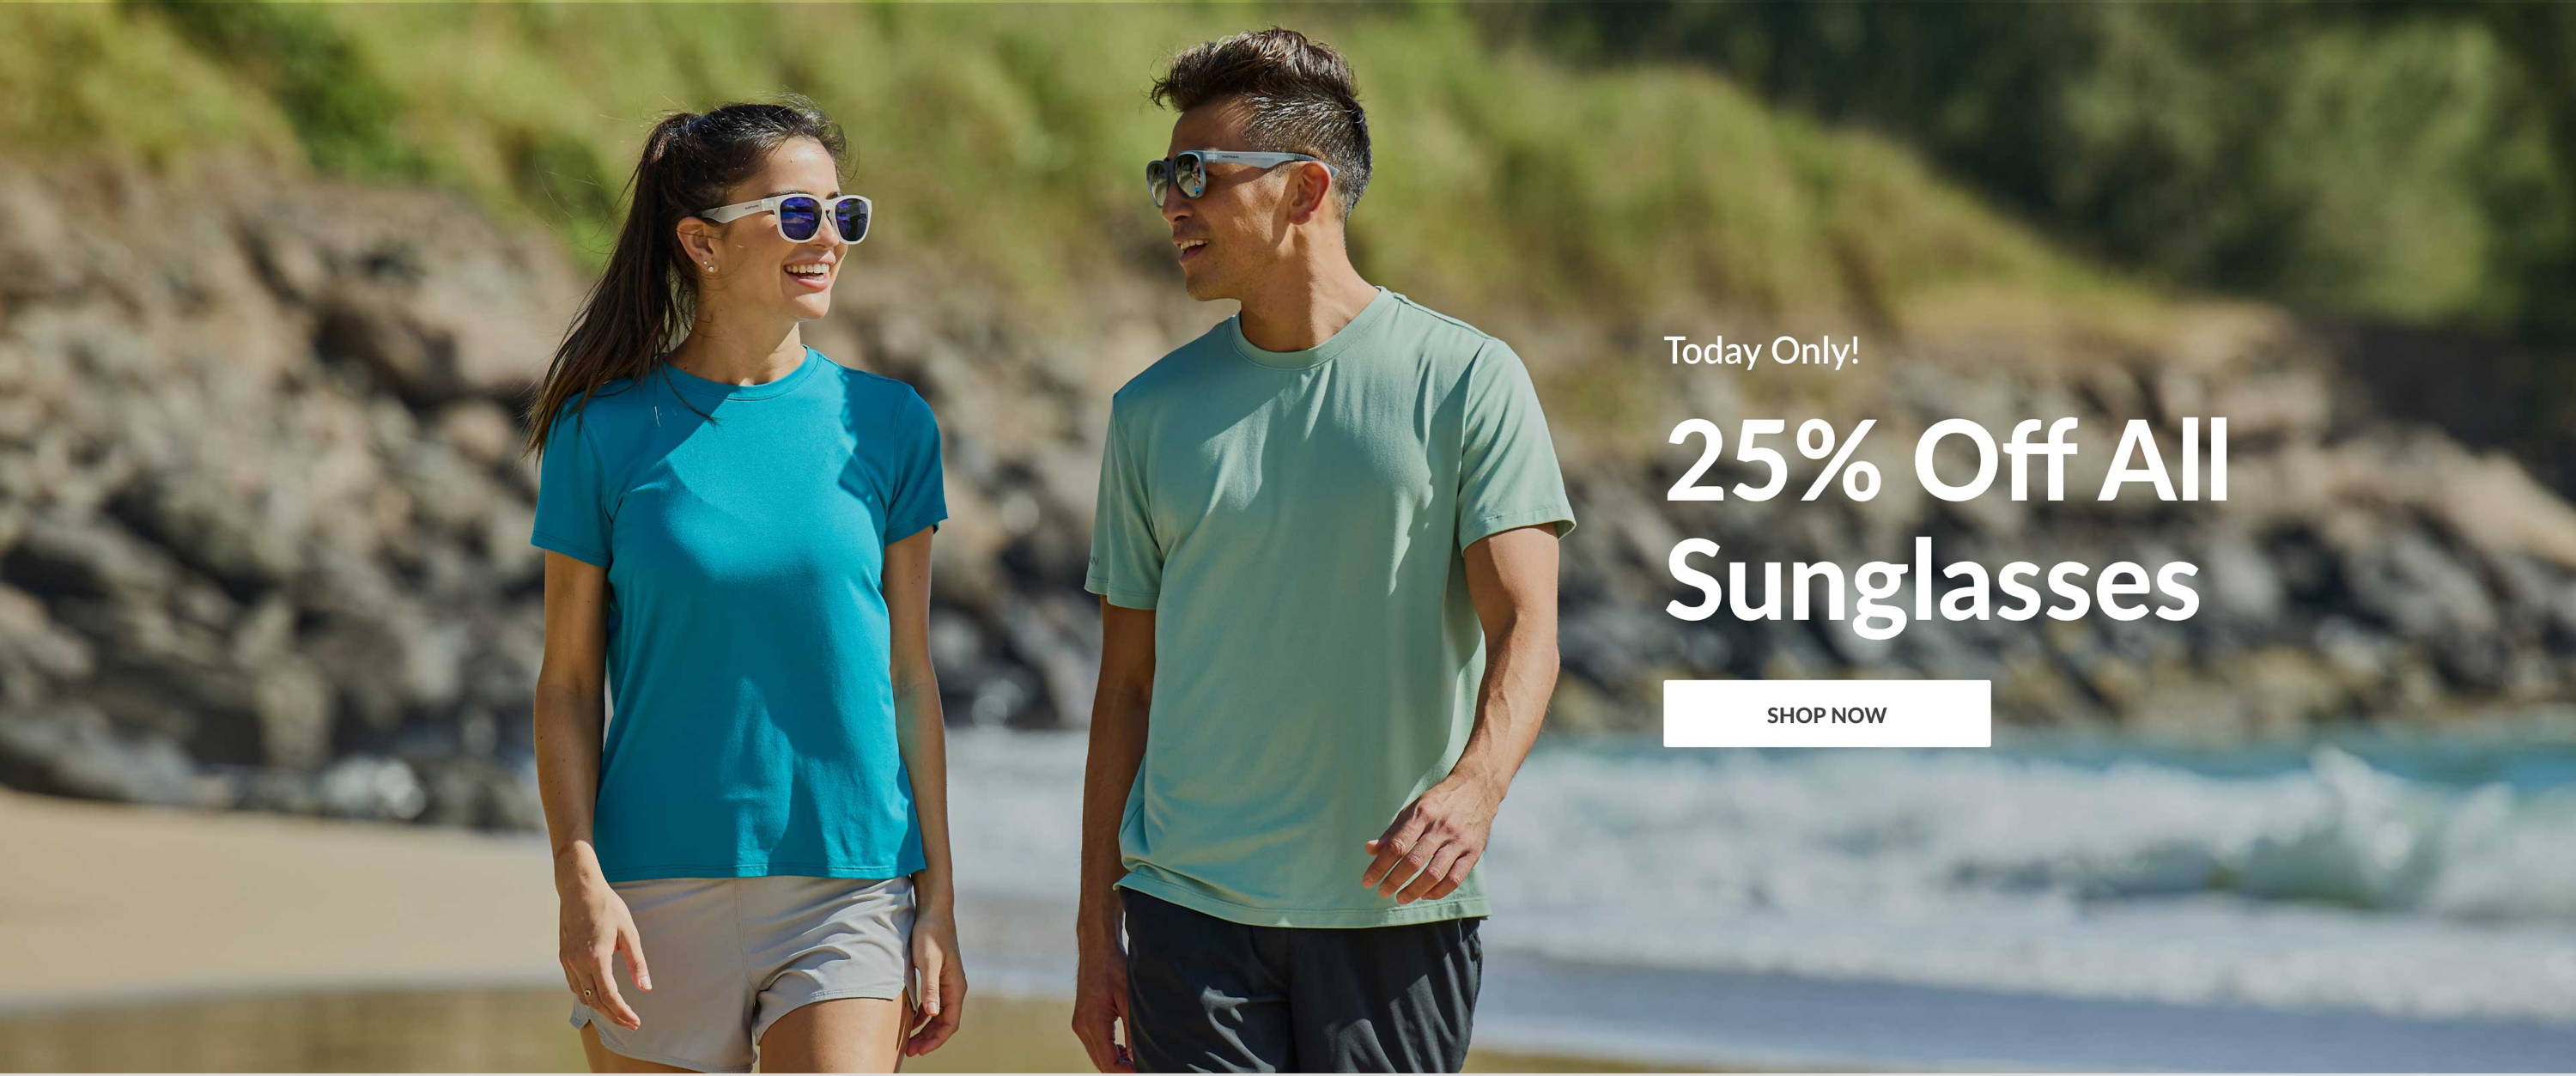 Today Only! 25% Off All Sunglasses - Shop Now